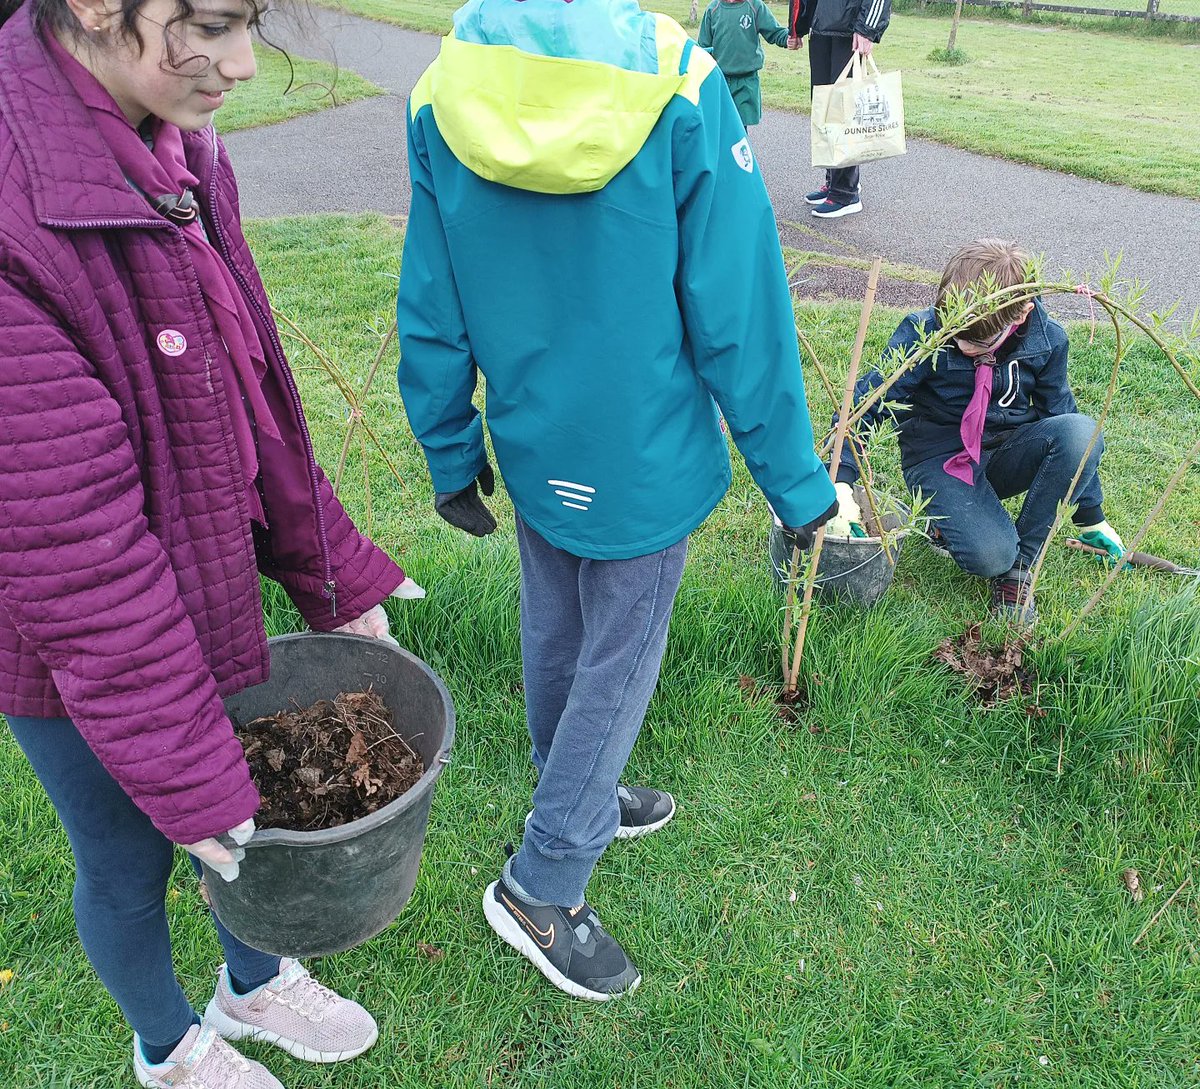 Exciting evening with @2ndCork Learned about our leaf mulching project, fed our garden with mulch, and explored sensory plants! 🌿 #CommunityEngagement #EnvironmentalEducation #TidyTowns #Ballyphehane